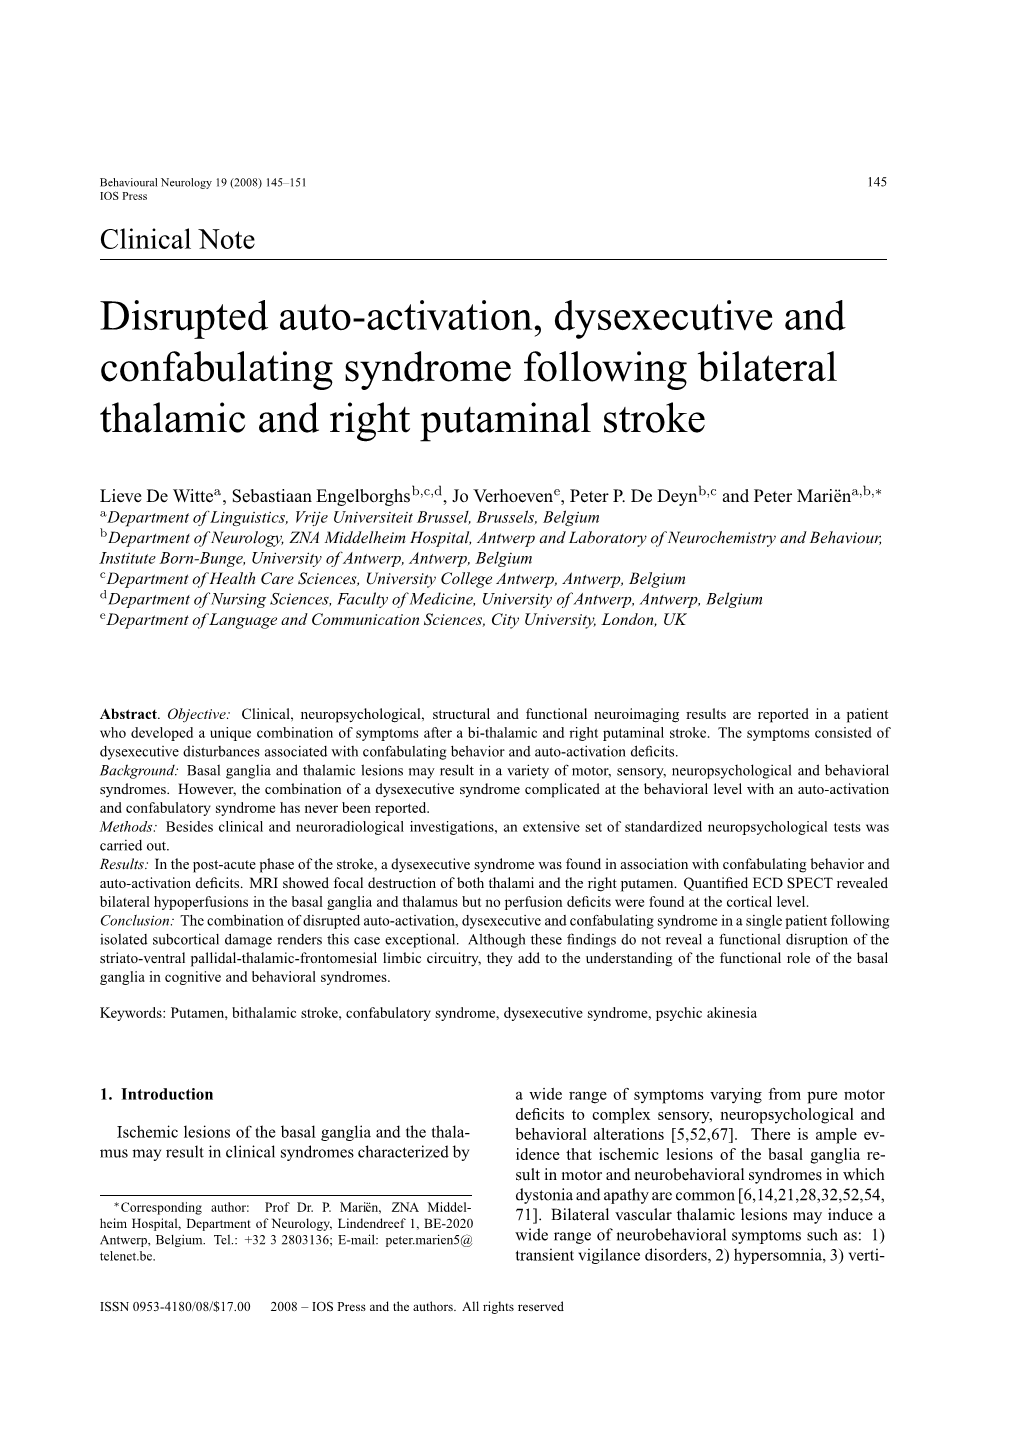 Disrupted Auto-Activation, Dysexecutive and Confabulating Syndrome Following Bilateral Thalamic and Right Putaminal Stroke